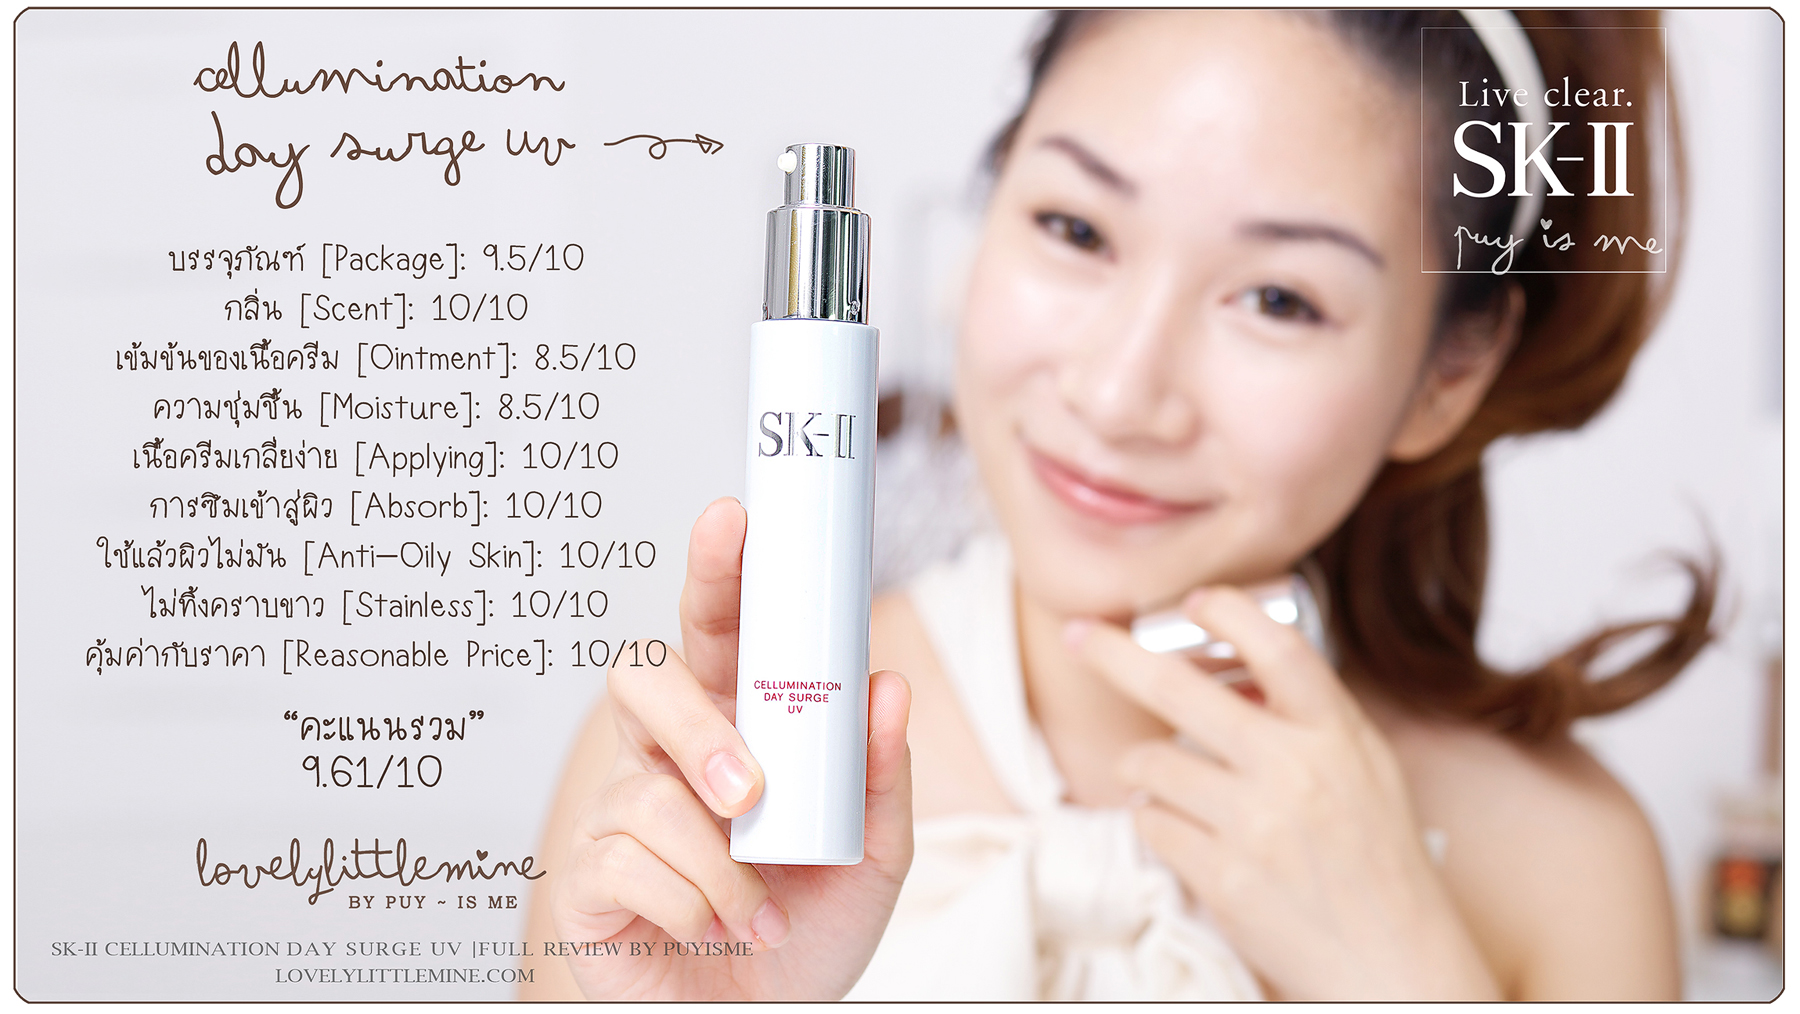 http://lovelylittlemine.com/wp-content/uploads/2013/03/SK-II%20Cellumination%20Day%20Surge%20UV-Review%20by%20PuYisme.jpg